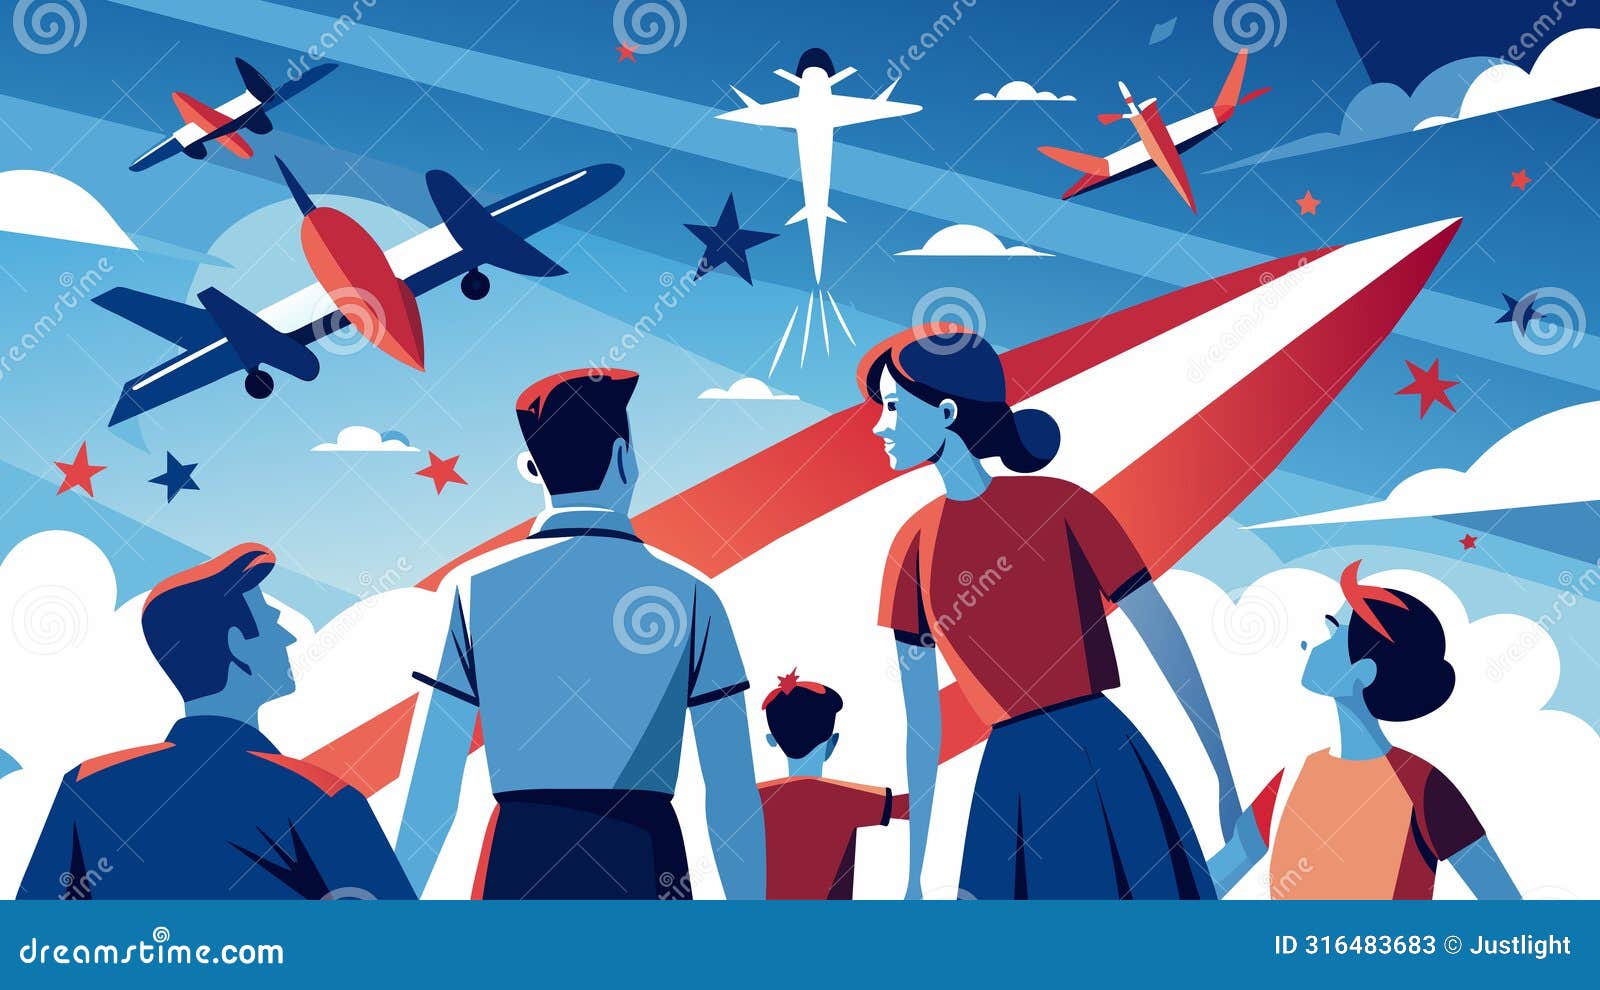 families gaze skyward mesmerized by the graceful dance of vintage planes as they glide by wings adorned with patriotic